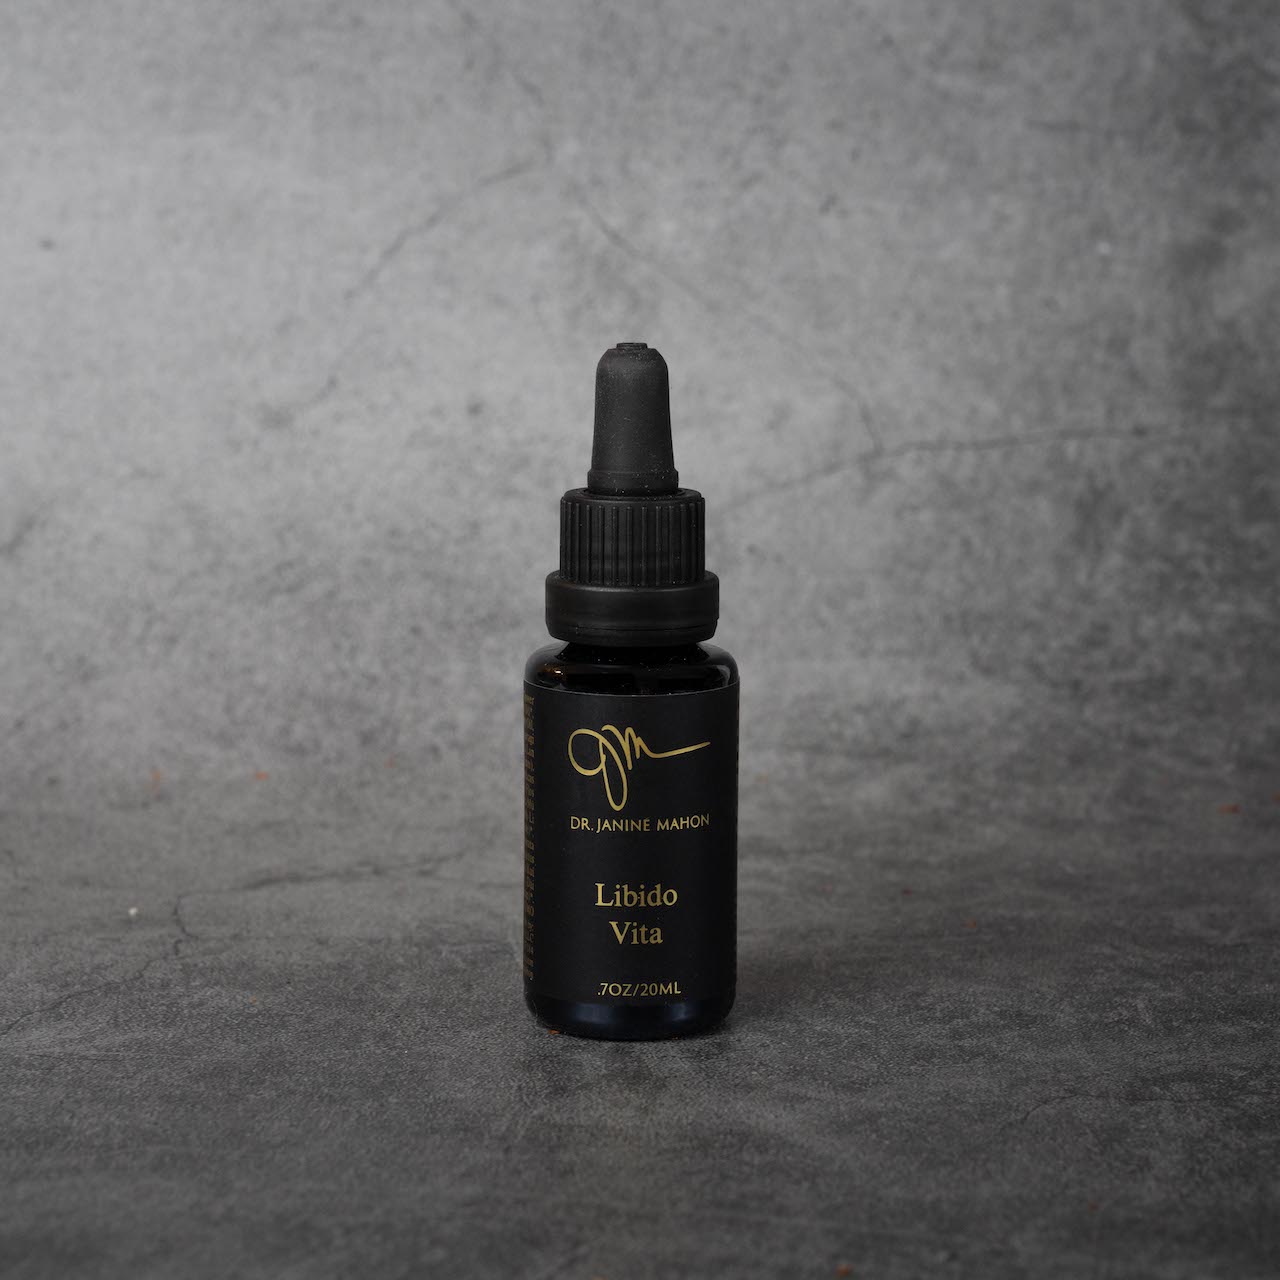 A small black bottle with gold lettering reading "Dr. Janine Mahon" in small print, and "Libido Vita, .70z/20ML" in slightly larger print. The bottle has a twist-off silicone dropper top.